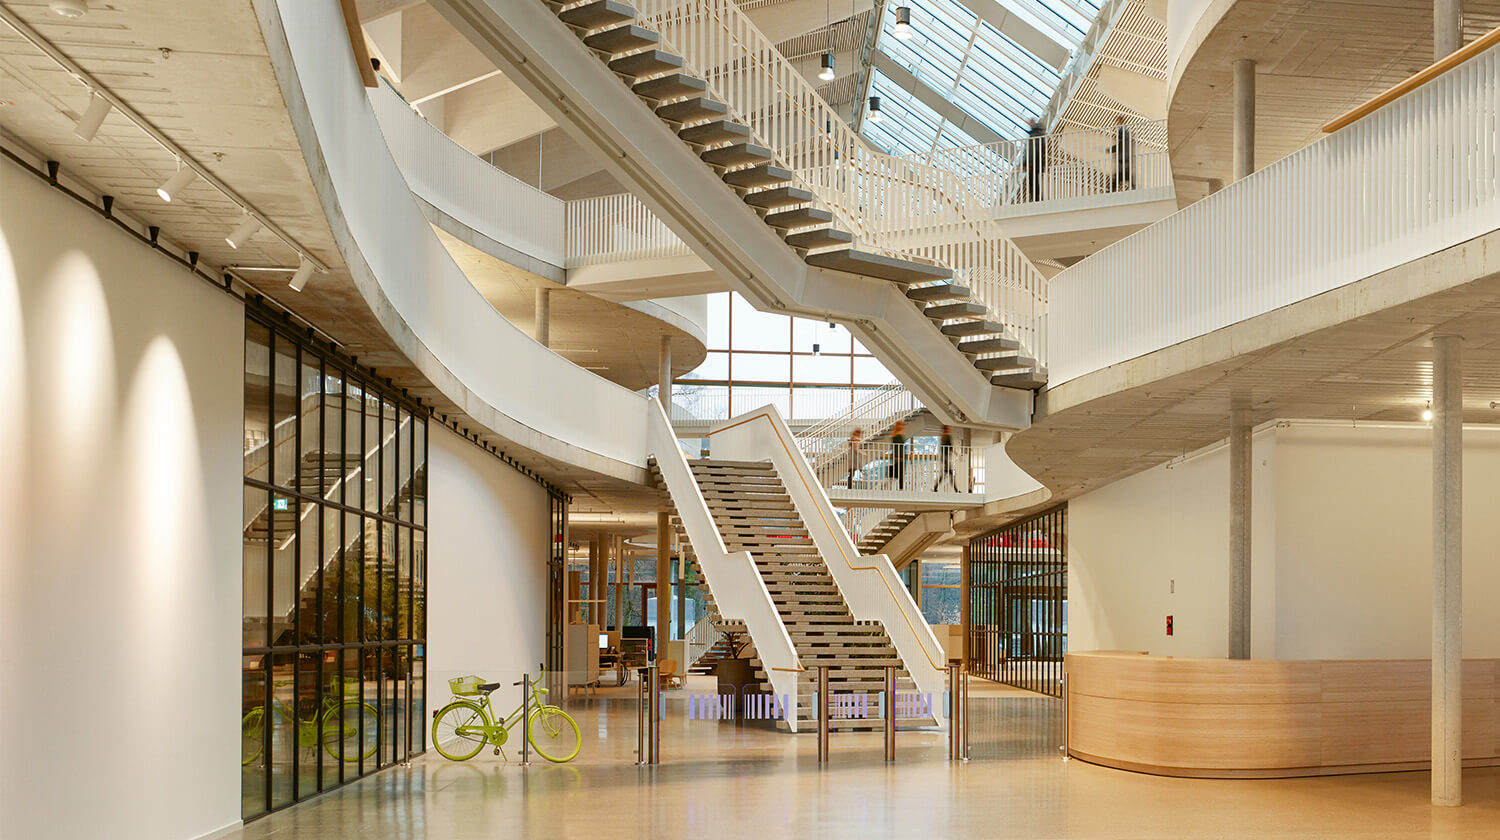 The headquarters of the organic food retailer Alnatura in Darmstadt proves that comfort and aesthetics can be combined with climate protection. The interior paint used, IndekoGeo from Caparol, is based on renewable raw materials, which saves CO2 emissions. The interior paint also ensures a healthy indoor climate.